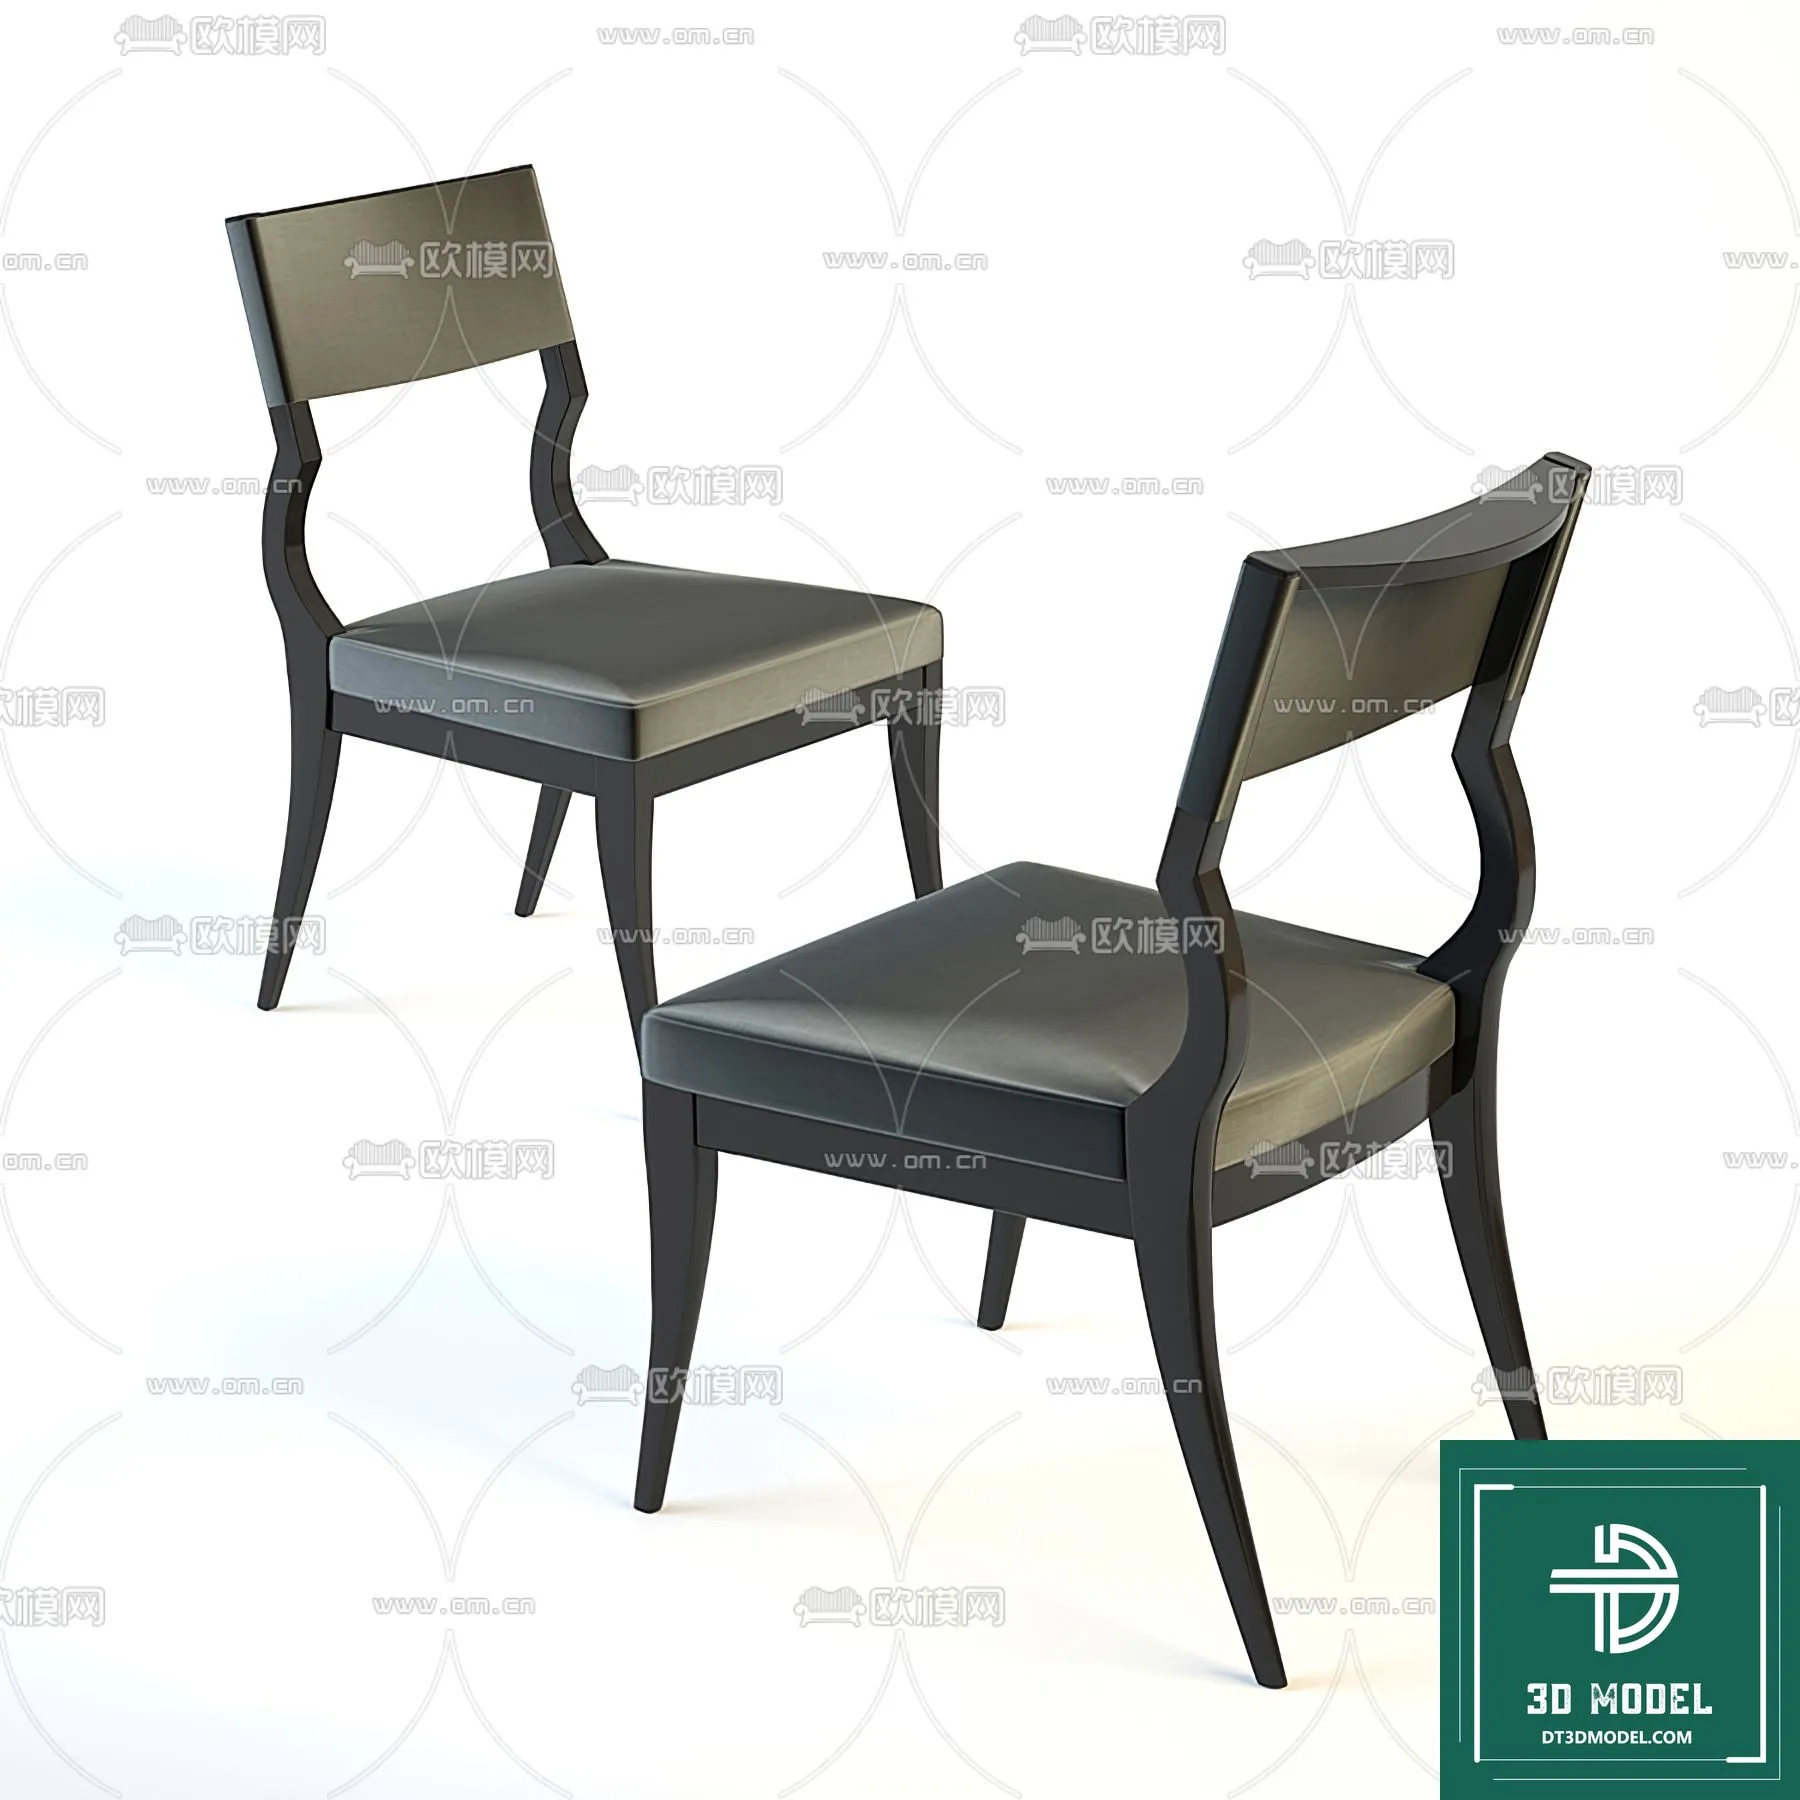 INDOCHINE STYLE – 3D MODELS – 793